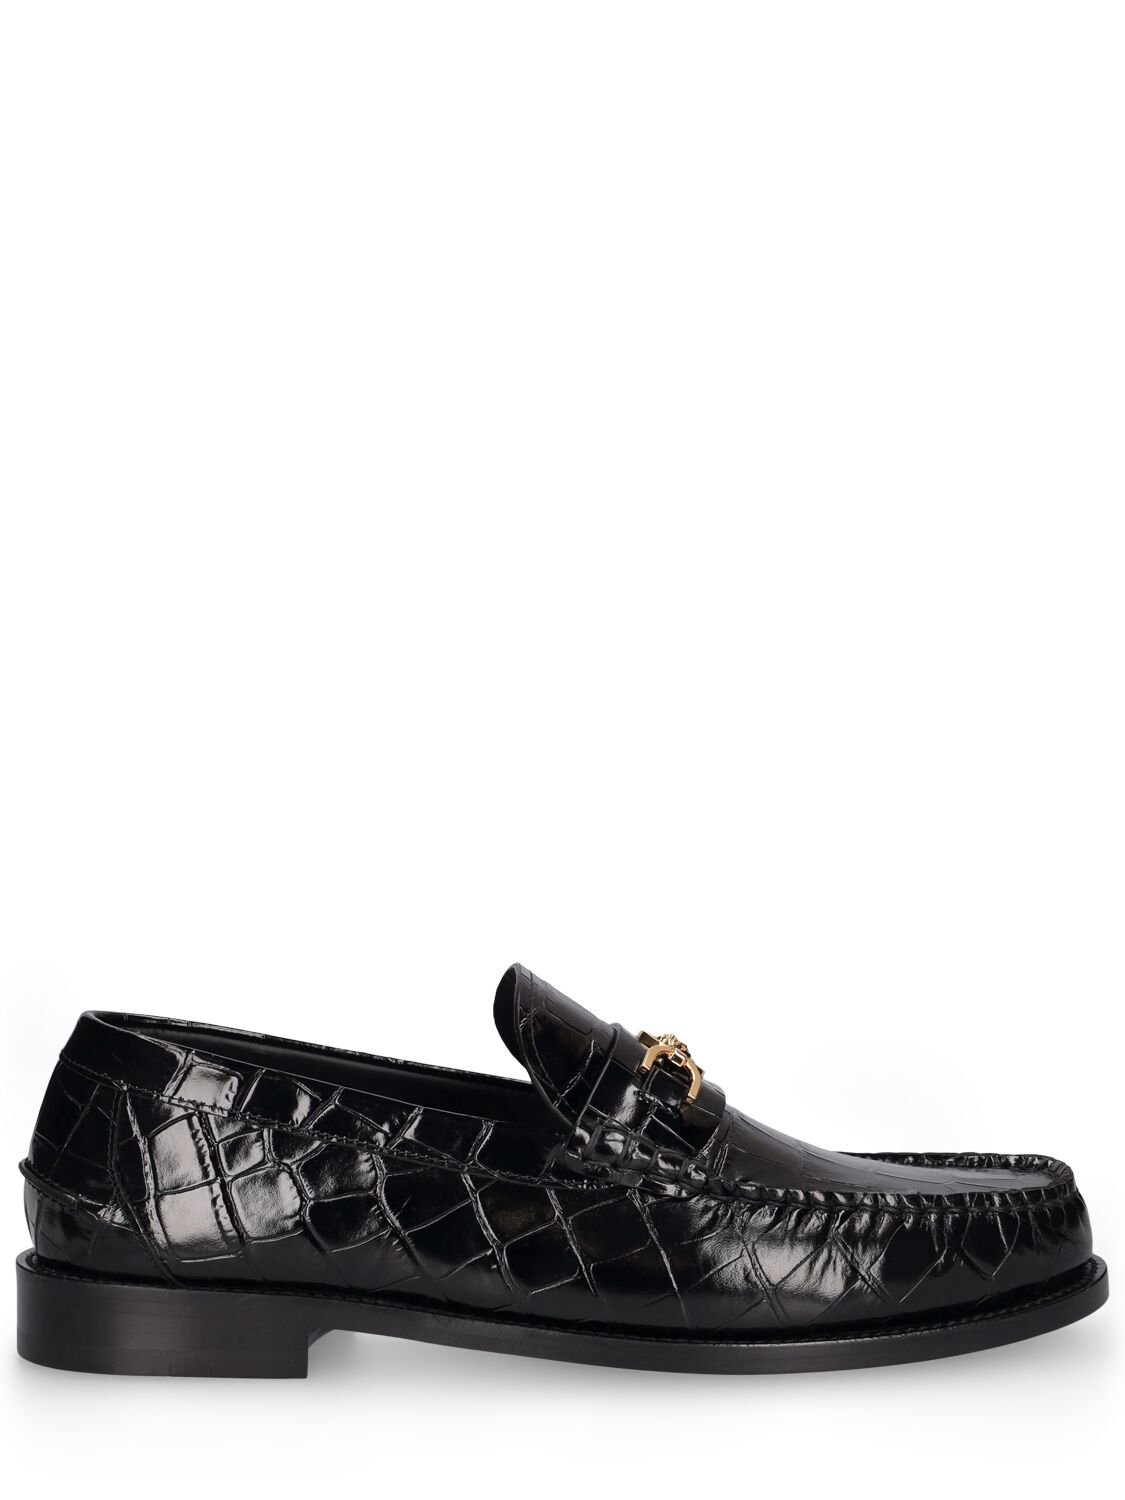 Versace Medusa Croc Embossed Leather Loafers In Black,gold